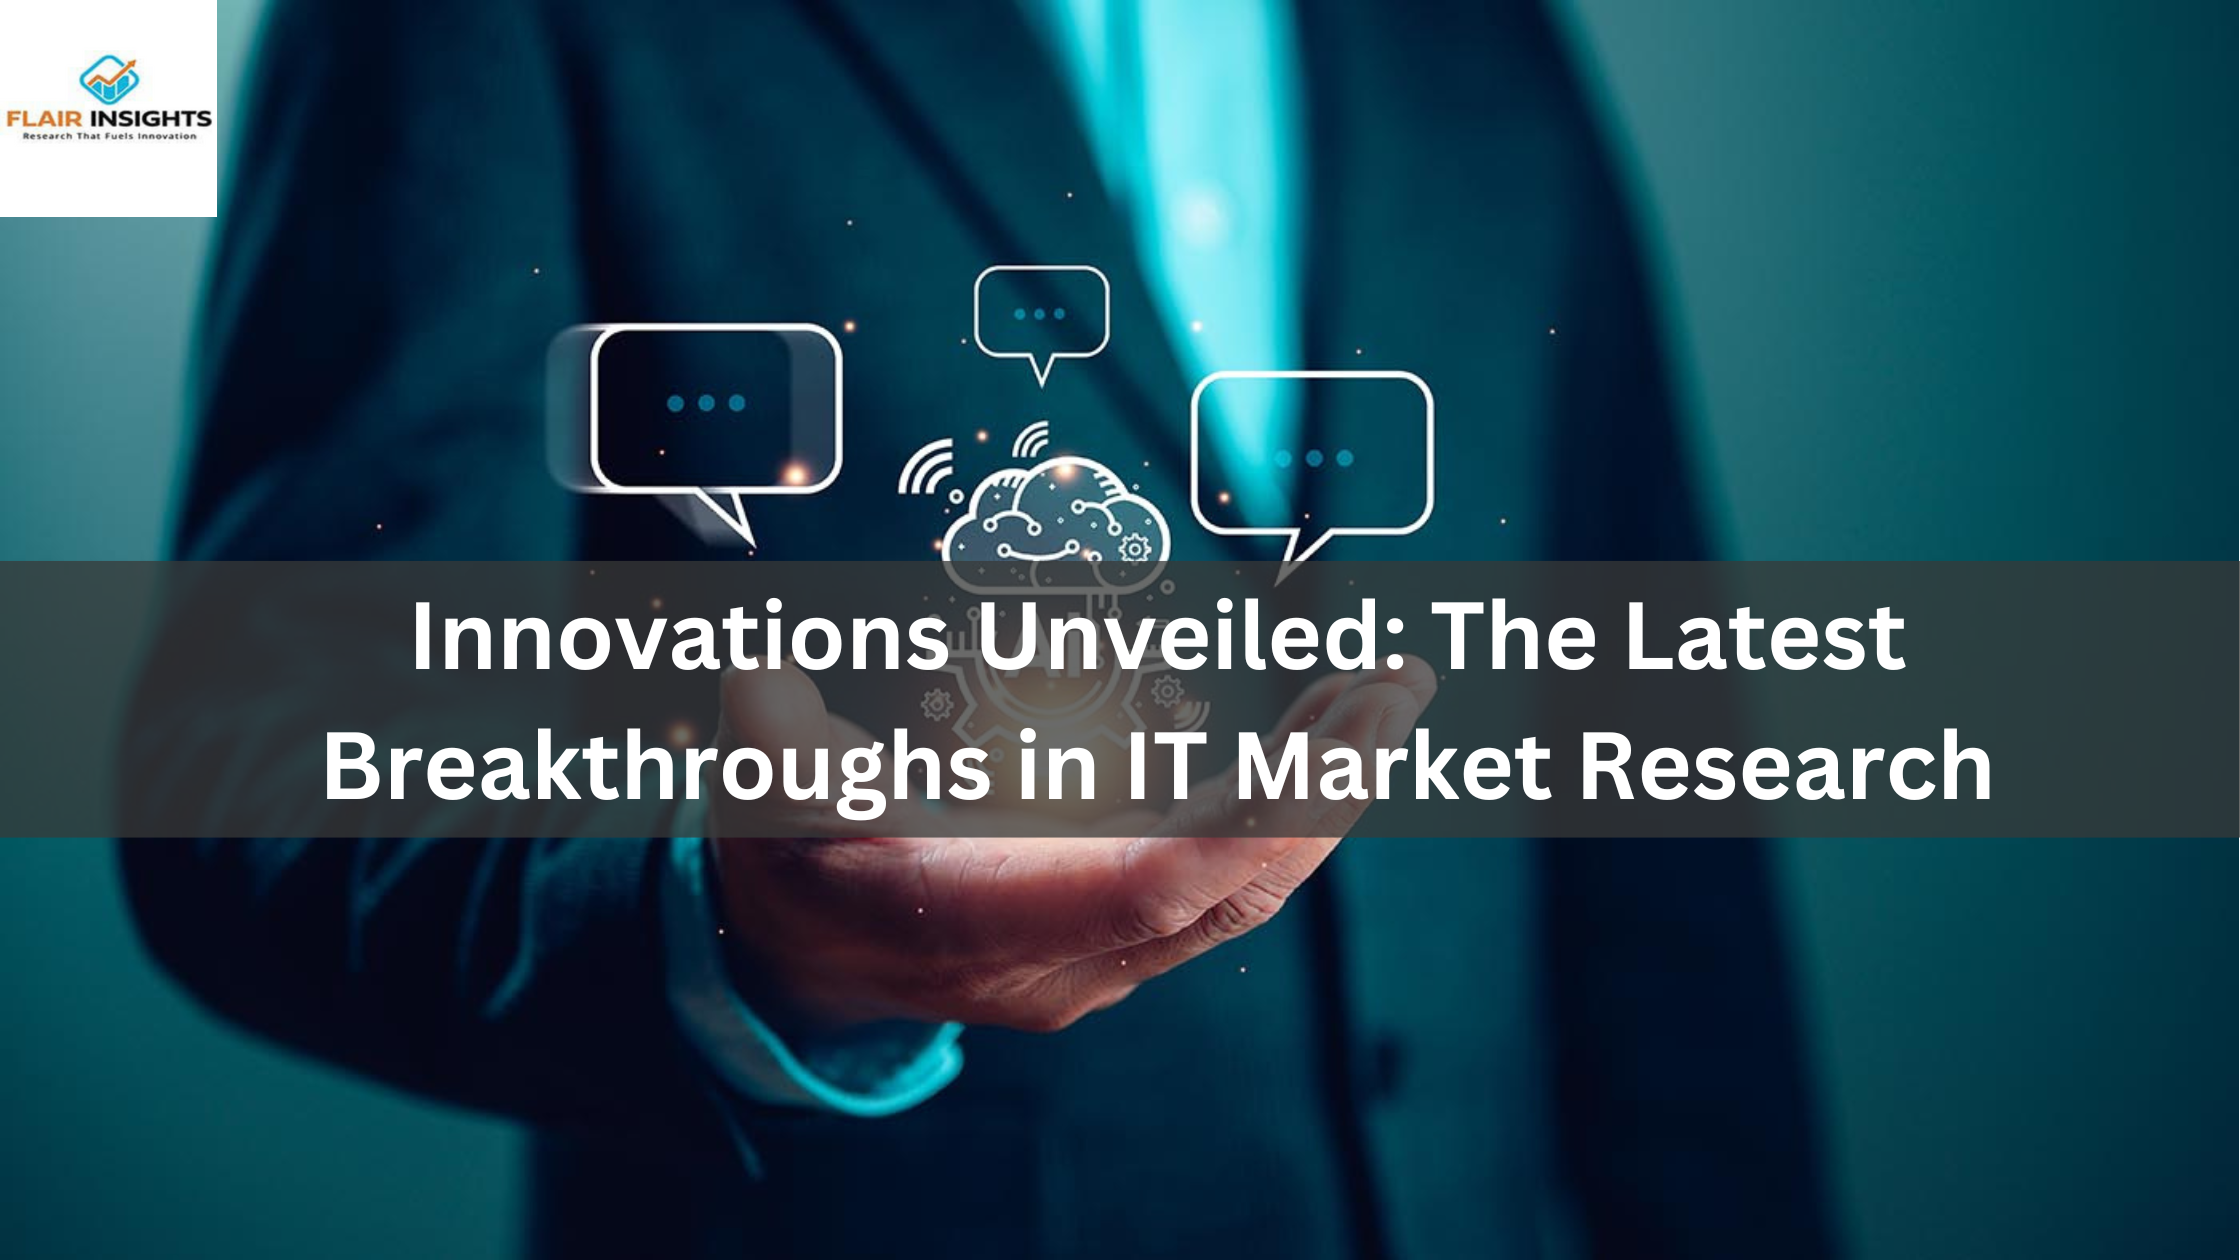 Innovations Unveiled: The Latest Breakthroughs in IT Market Research